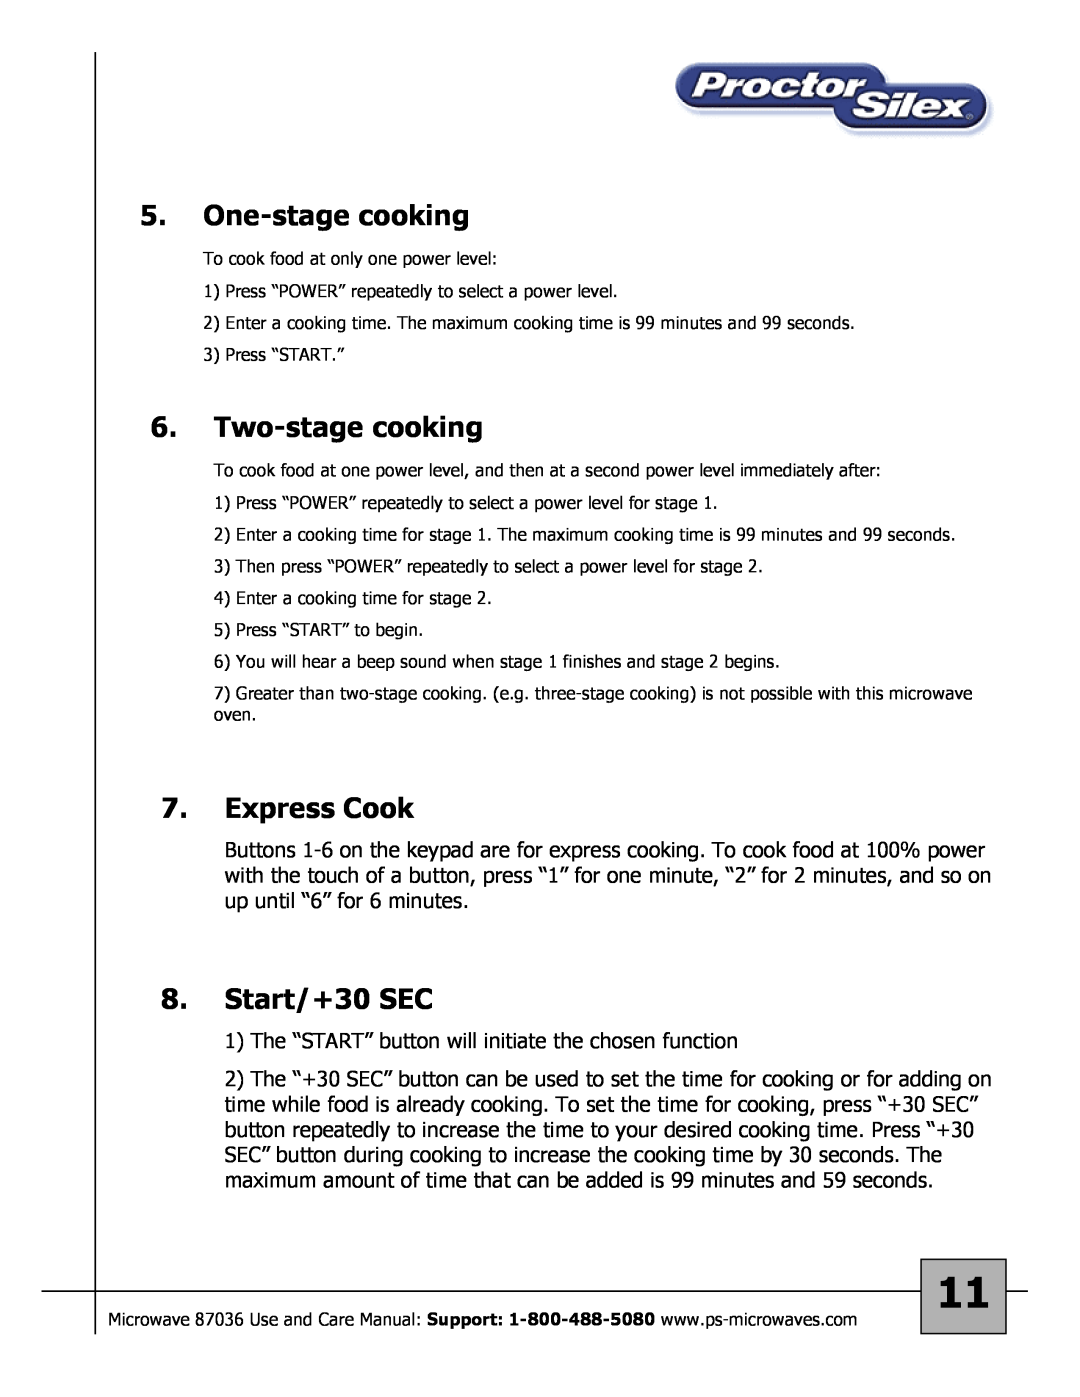 Proctor-Silex 87036 owner manual One-stagecooking, Two-stagecooking, Express Cook, Start/+30 SEC 